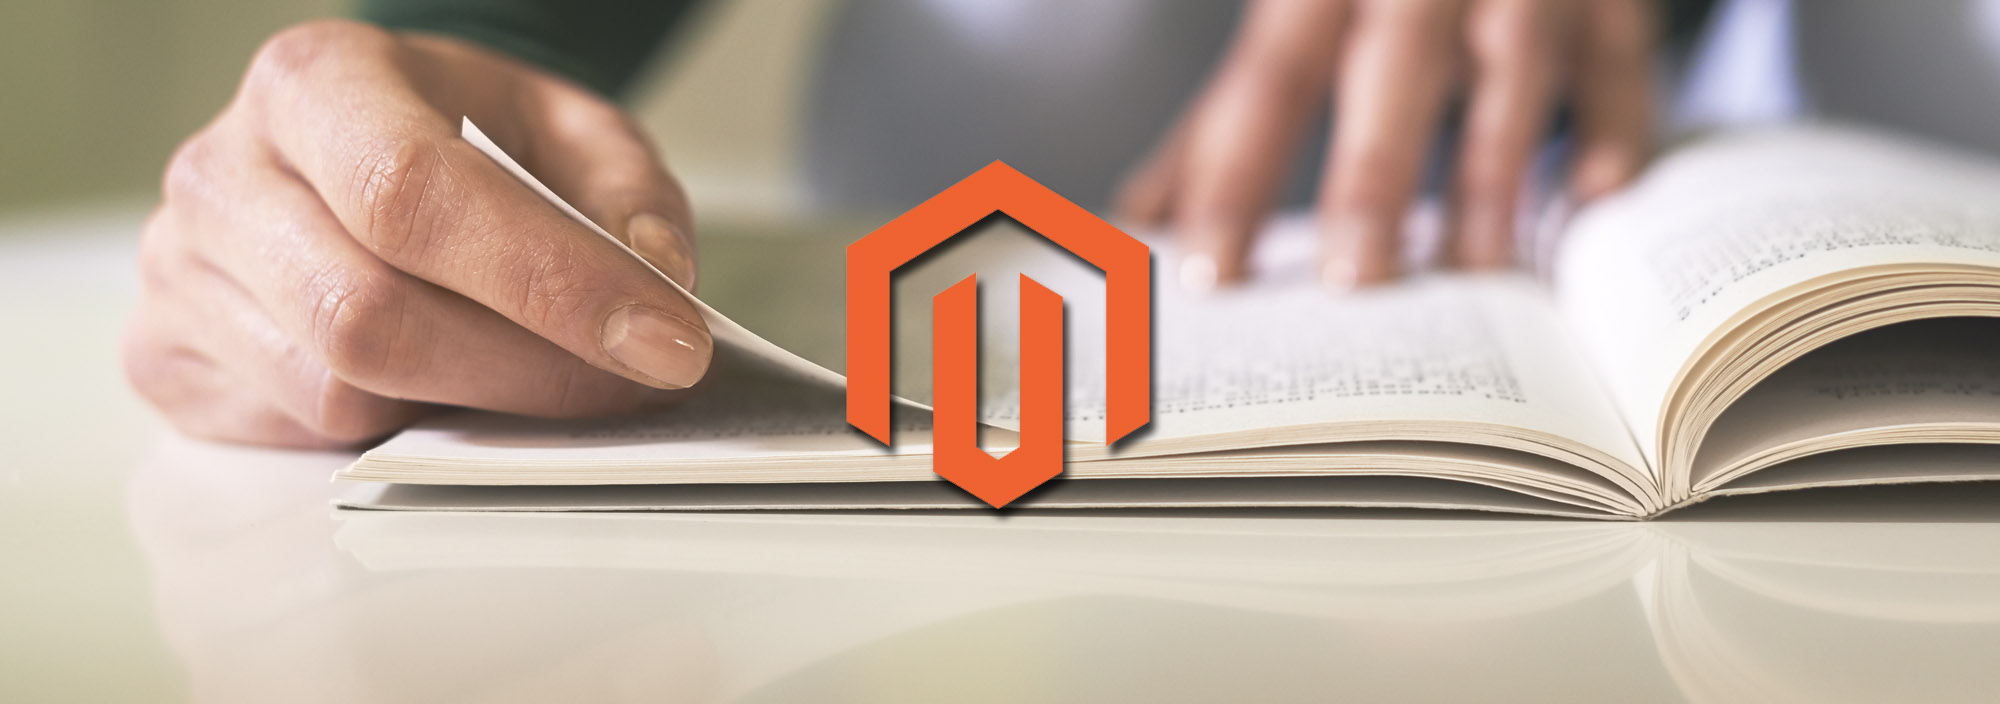 Magento 2 Vs 1.9: Whats New For Merchants And Developers